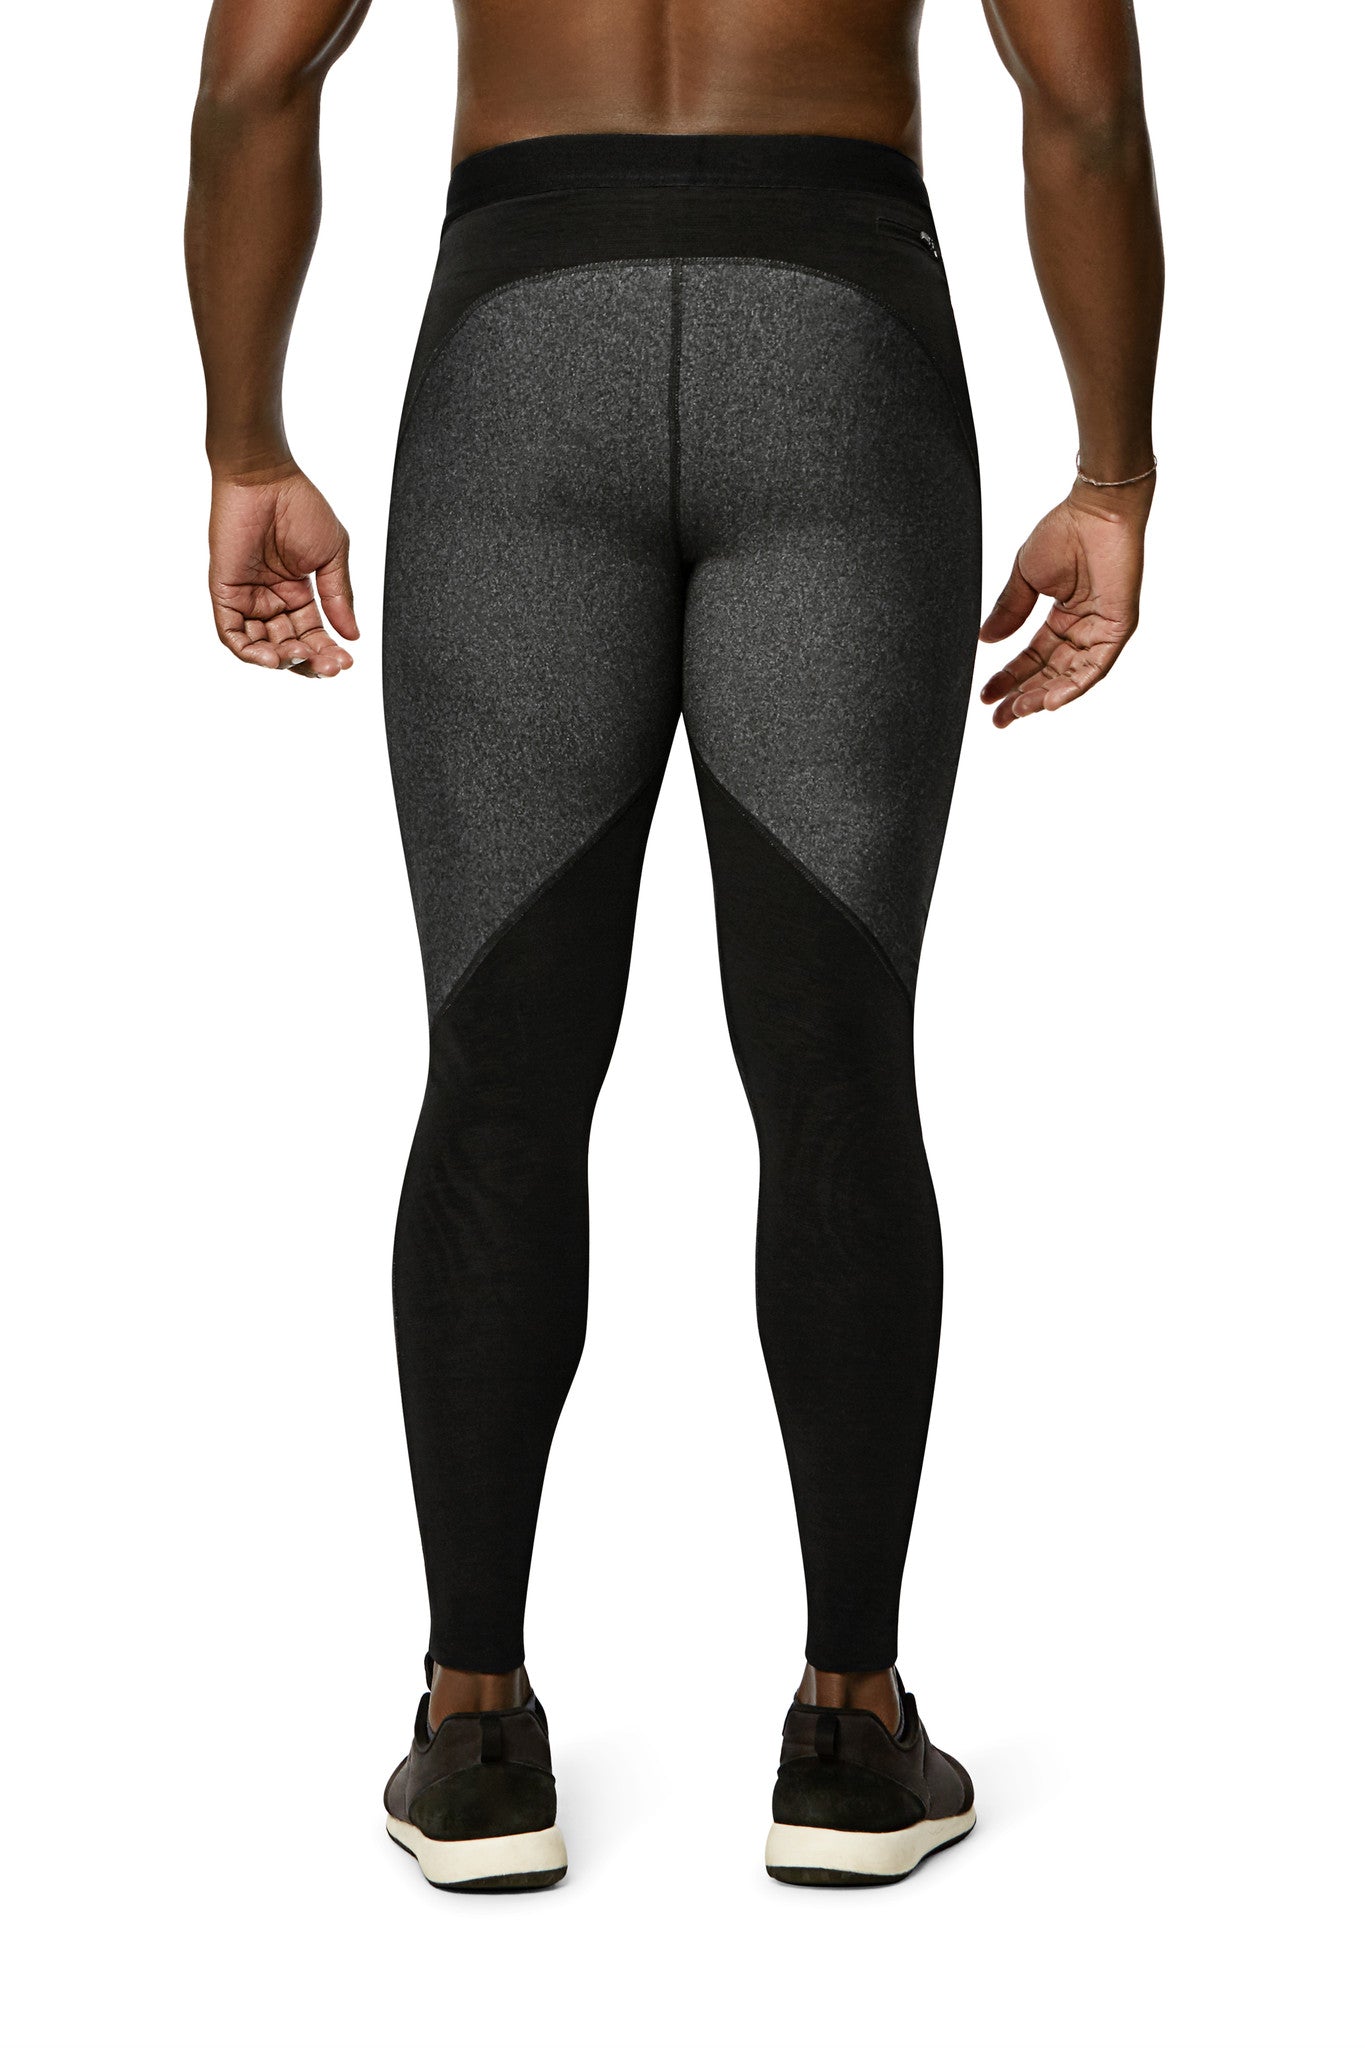 Men's New Breathable Stretchy Pro Compression Pants Running Tights